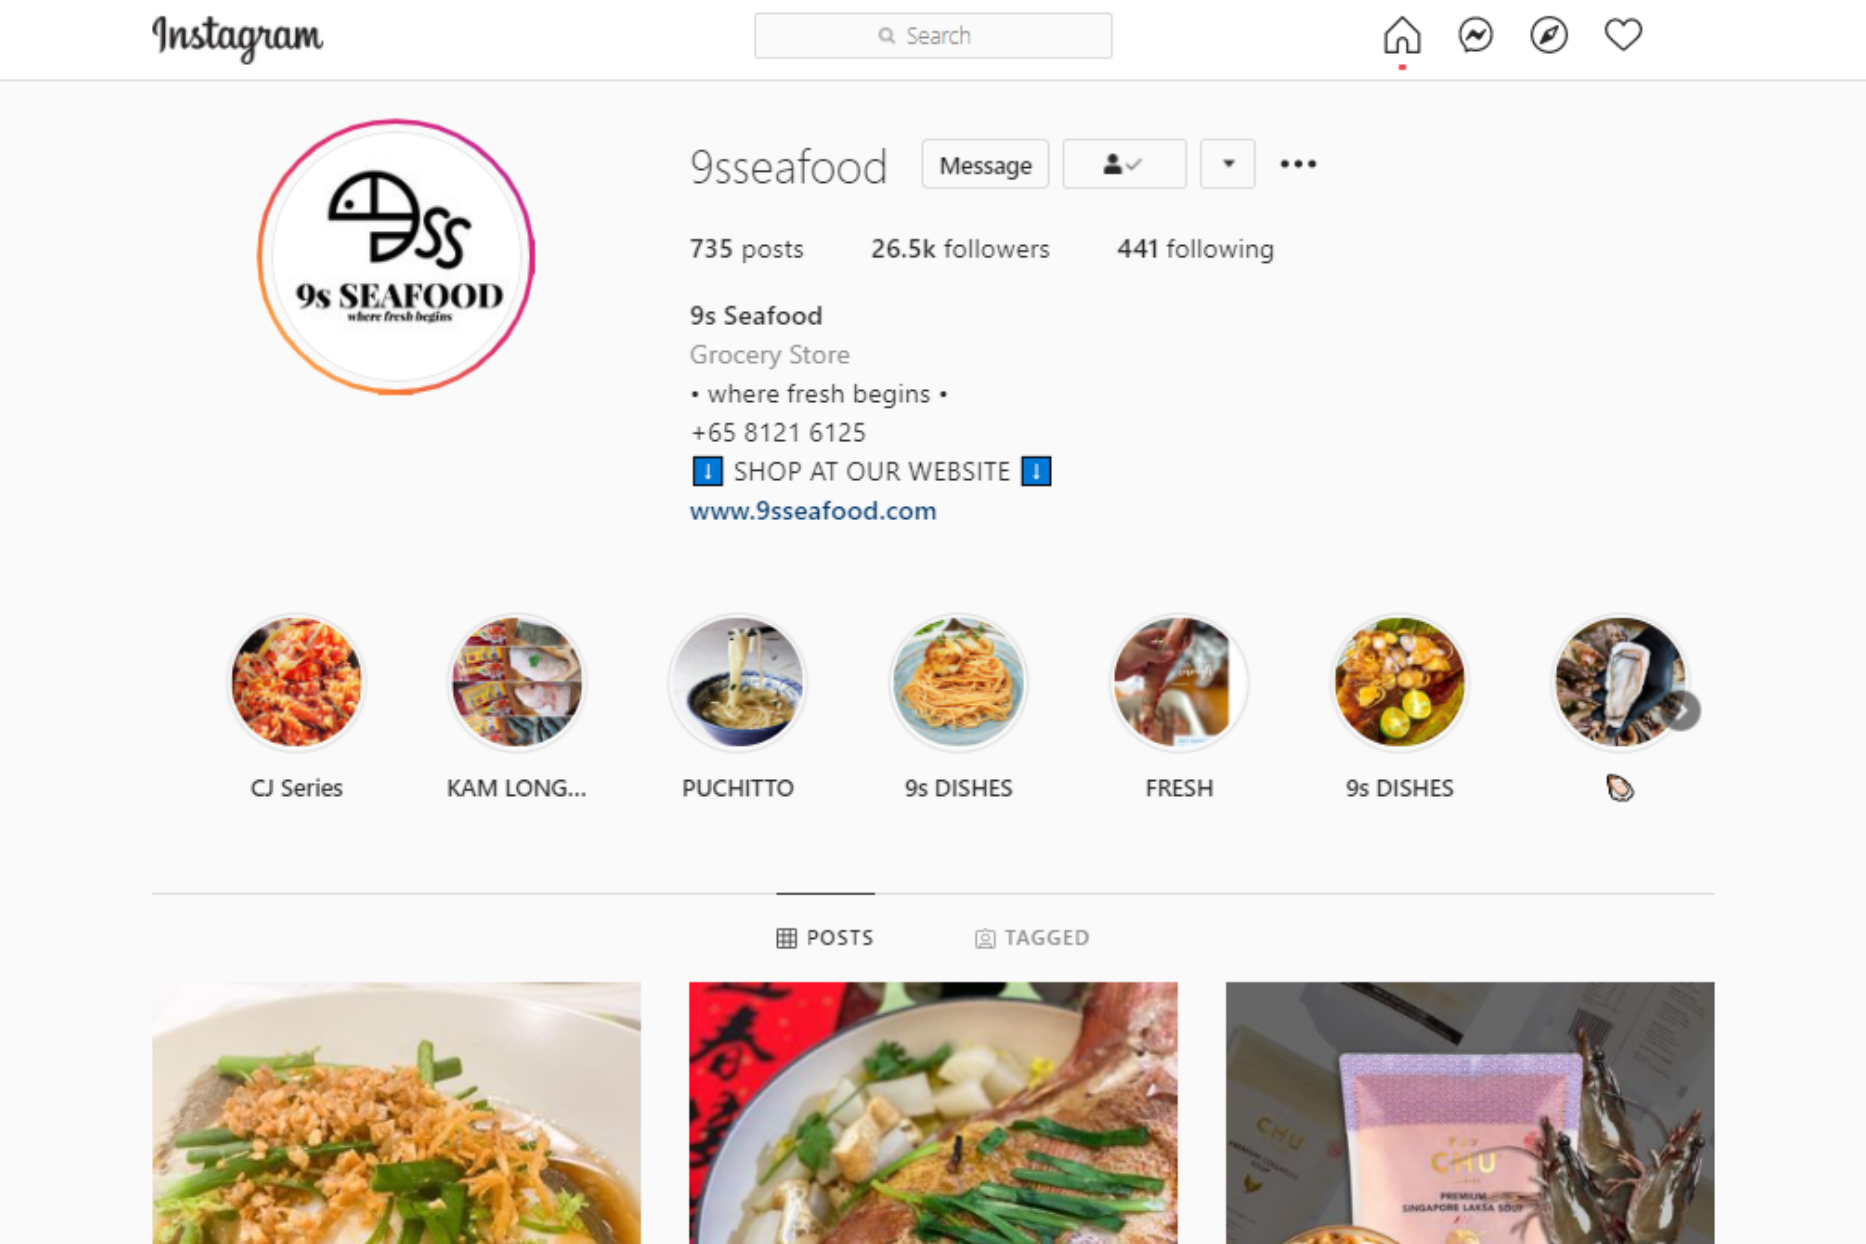 9s Seafood has more than 25k followers on Instagram as of 7 Feb 2021